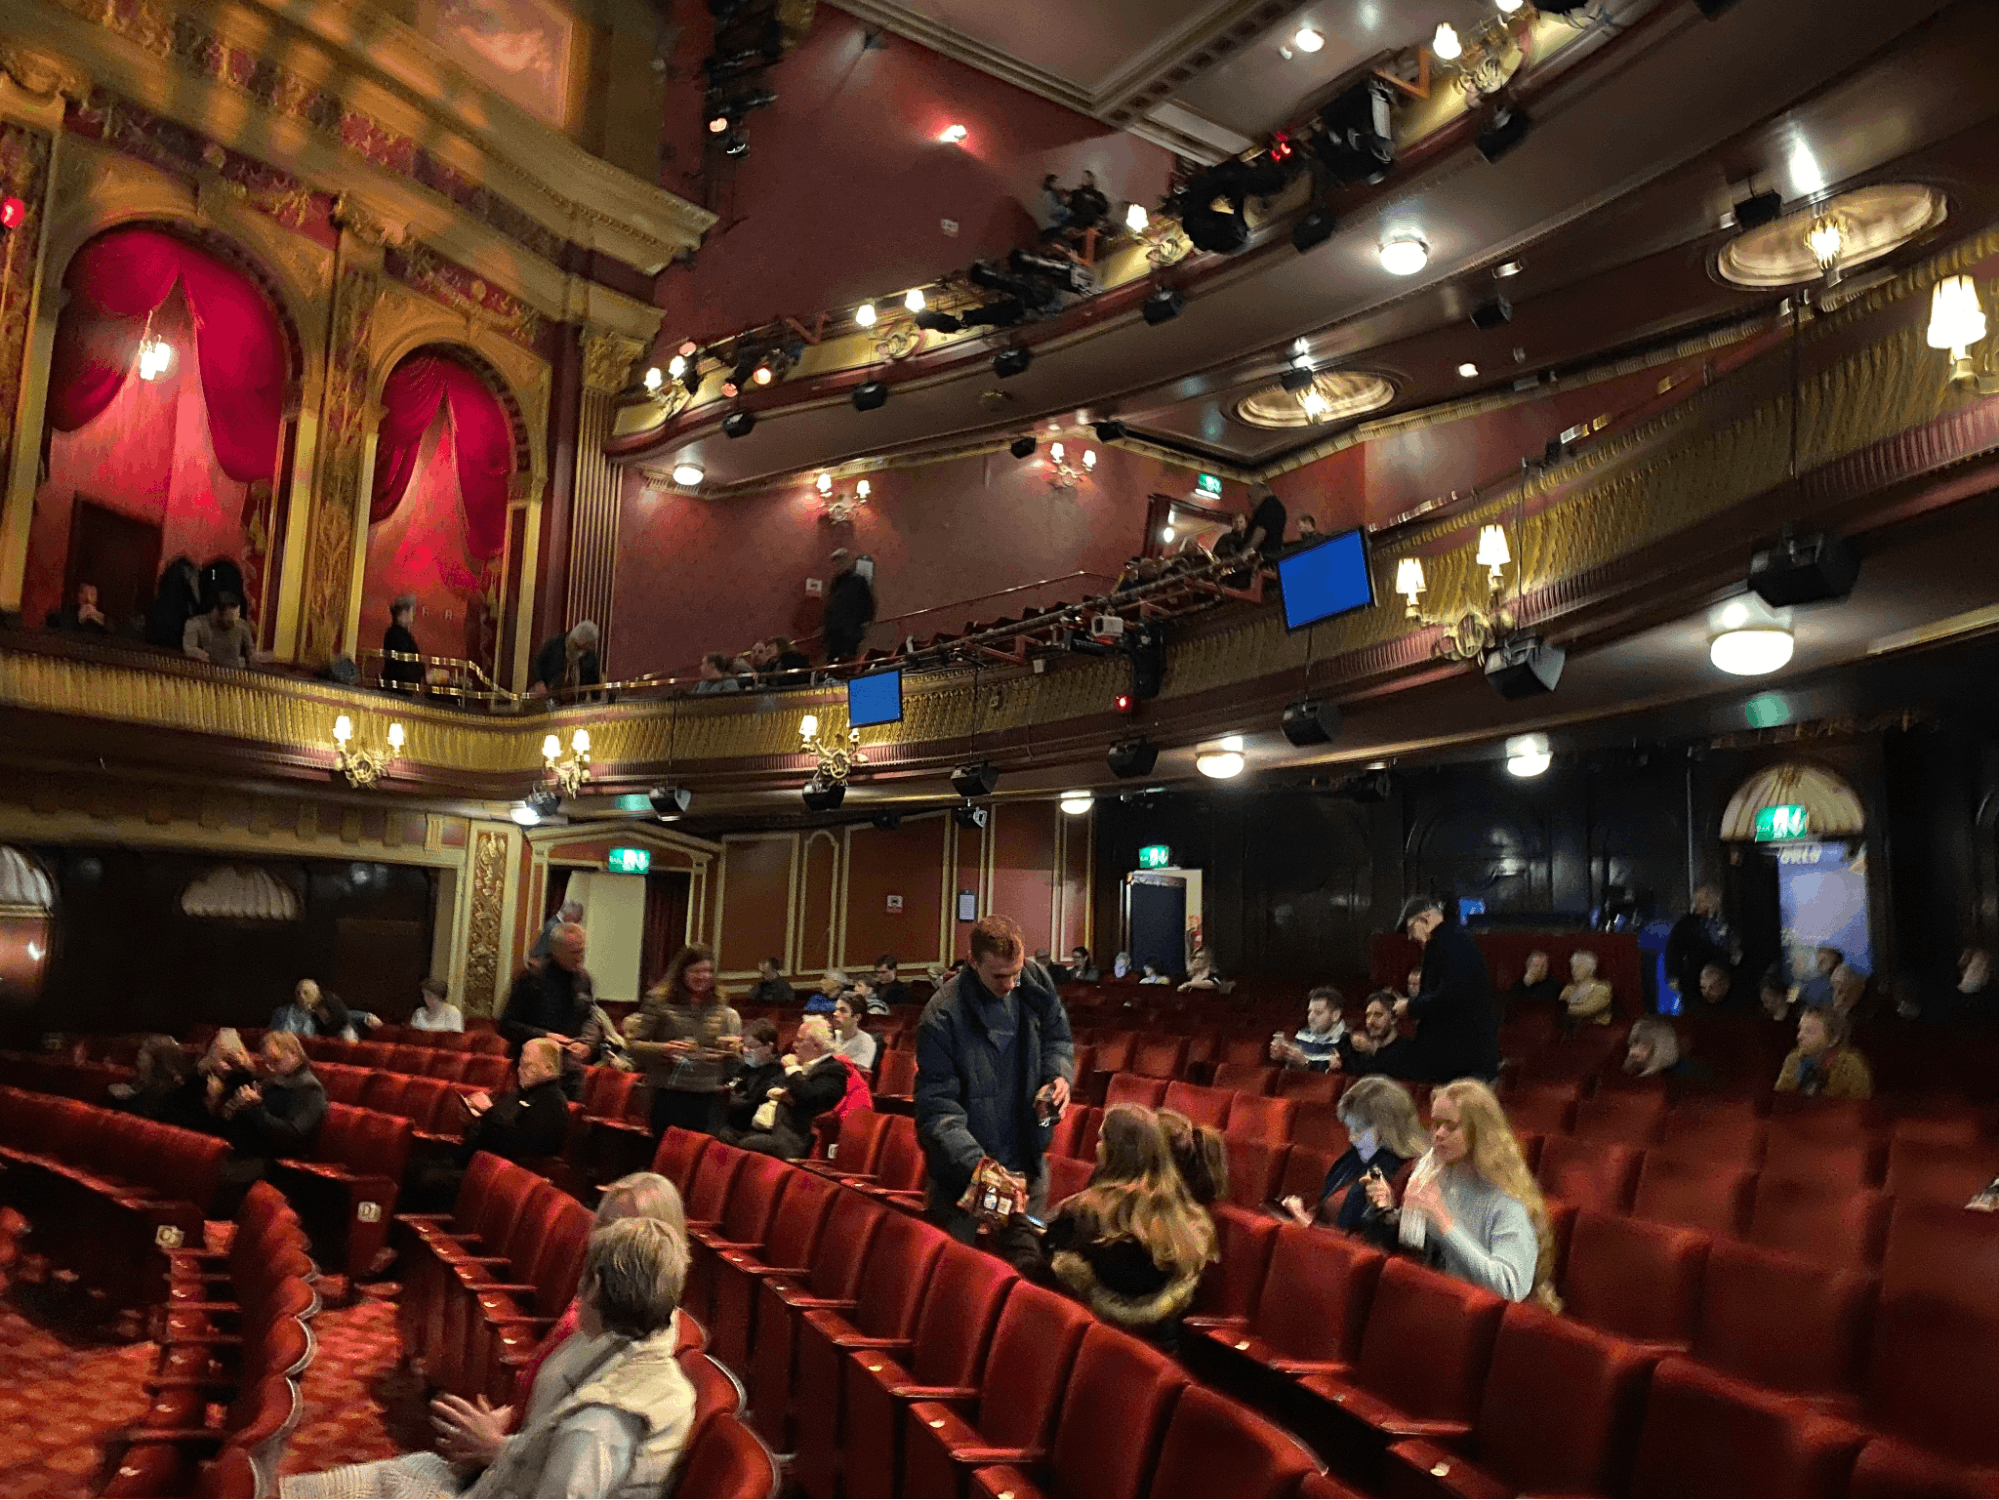 Observing and asking questions to theatre goers in a London theatre.